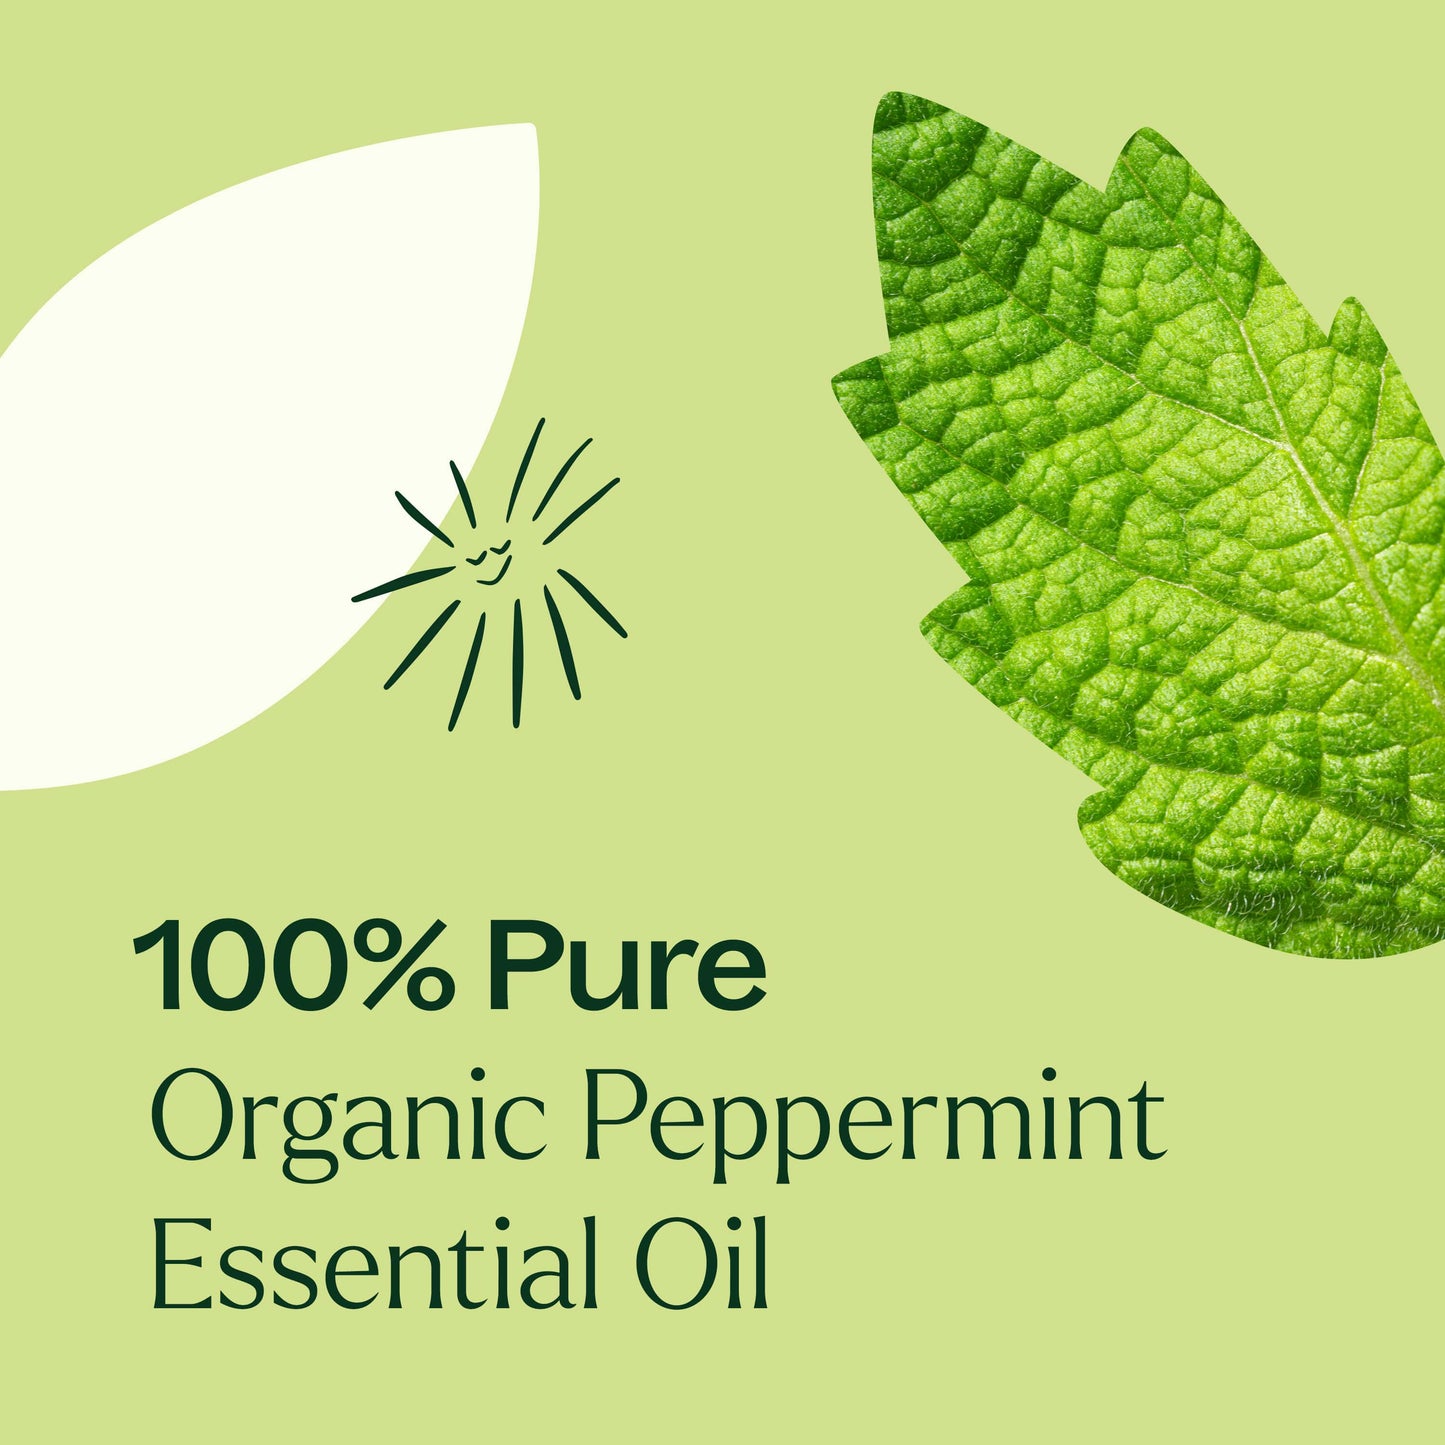 Organic Peppermint Essential Oil Pre-Diluted Roll-On is 100% pure